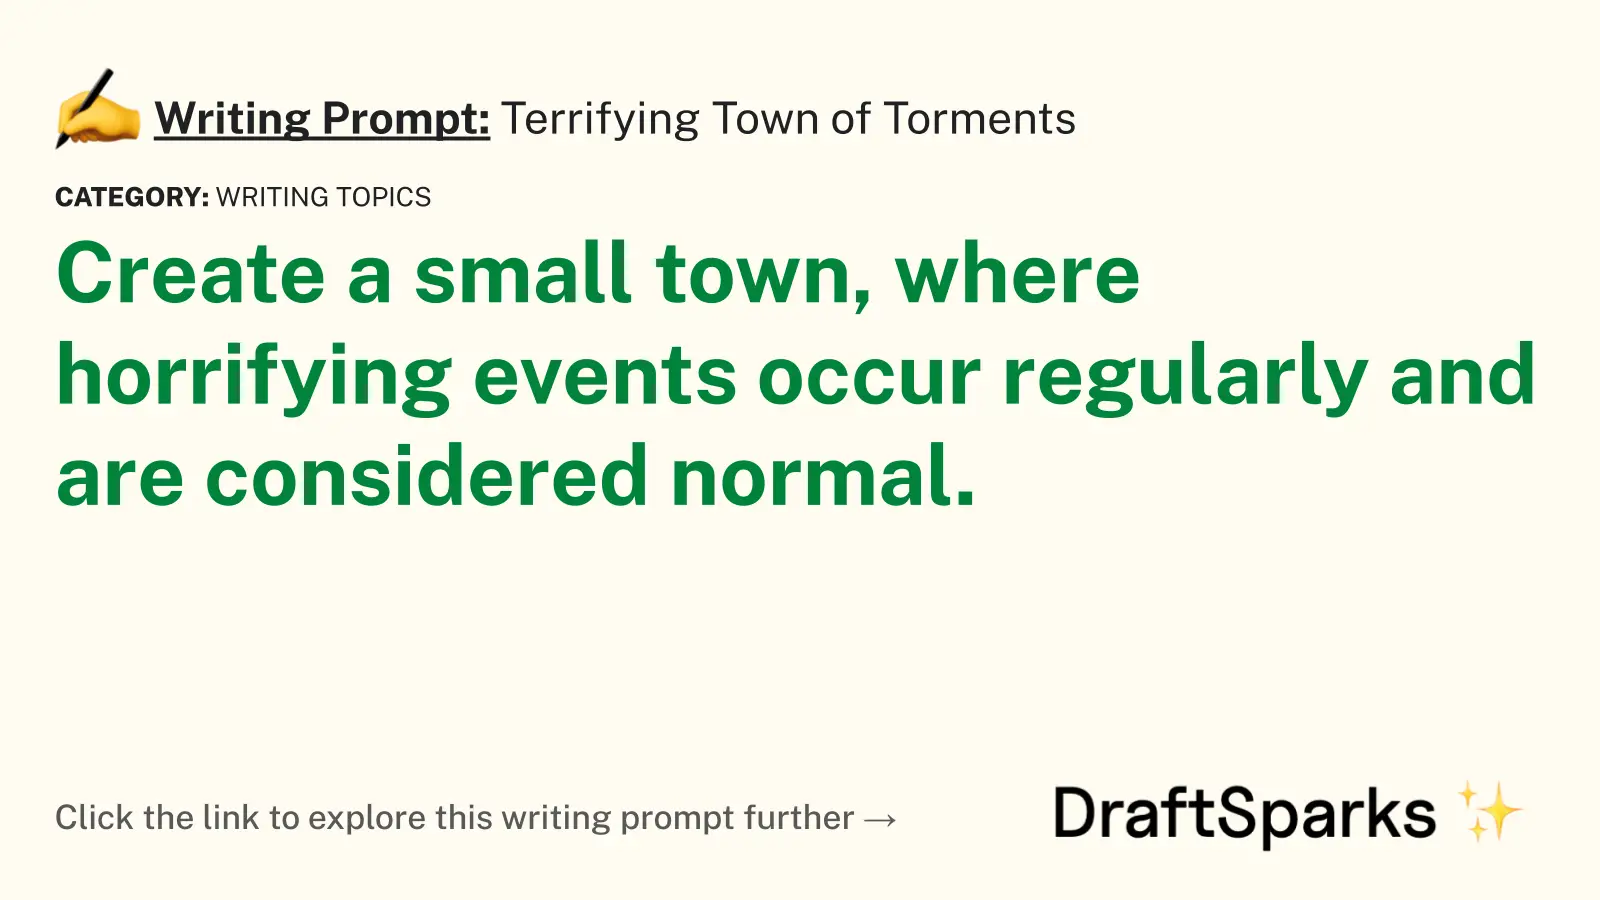 Terrifying Town of Torments